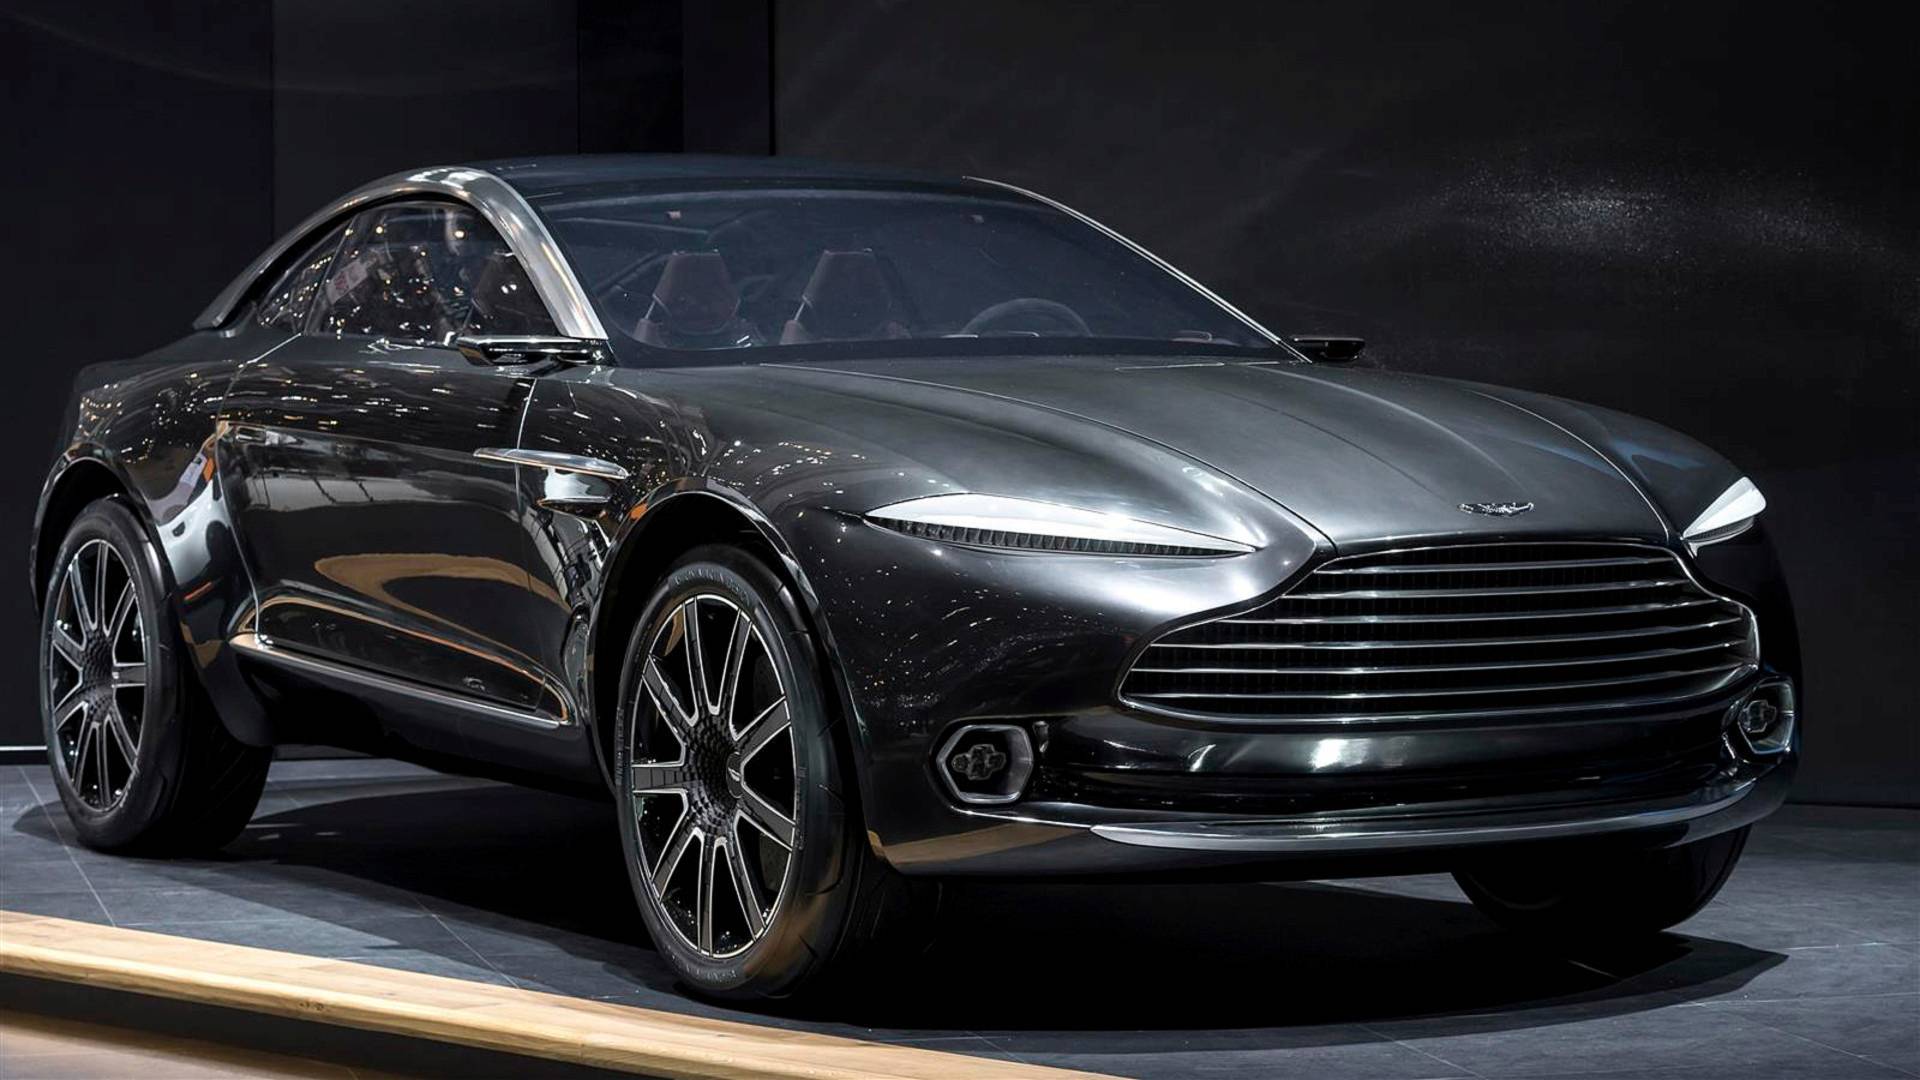 Aston Martin DBX SUV Production Confirmed For